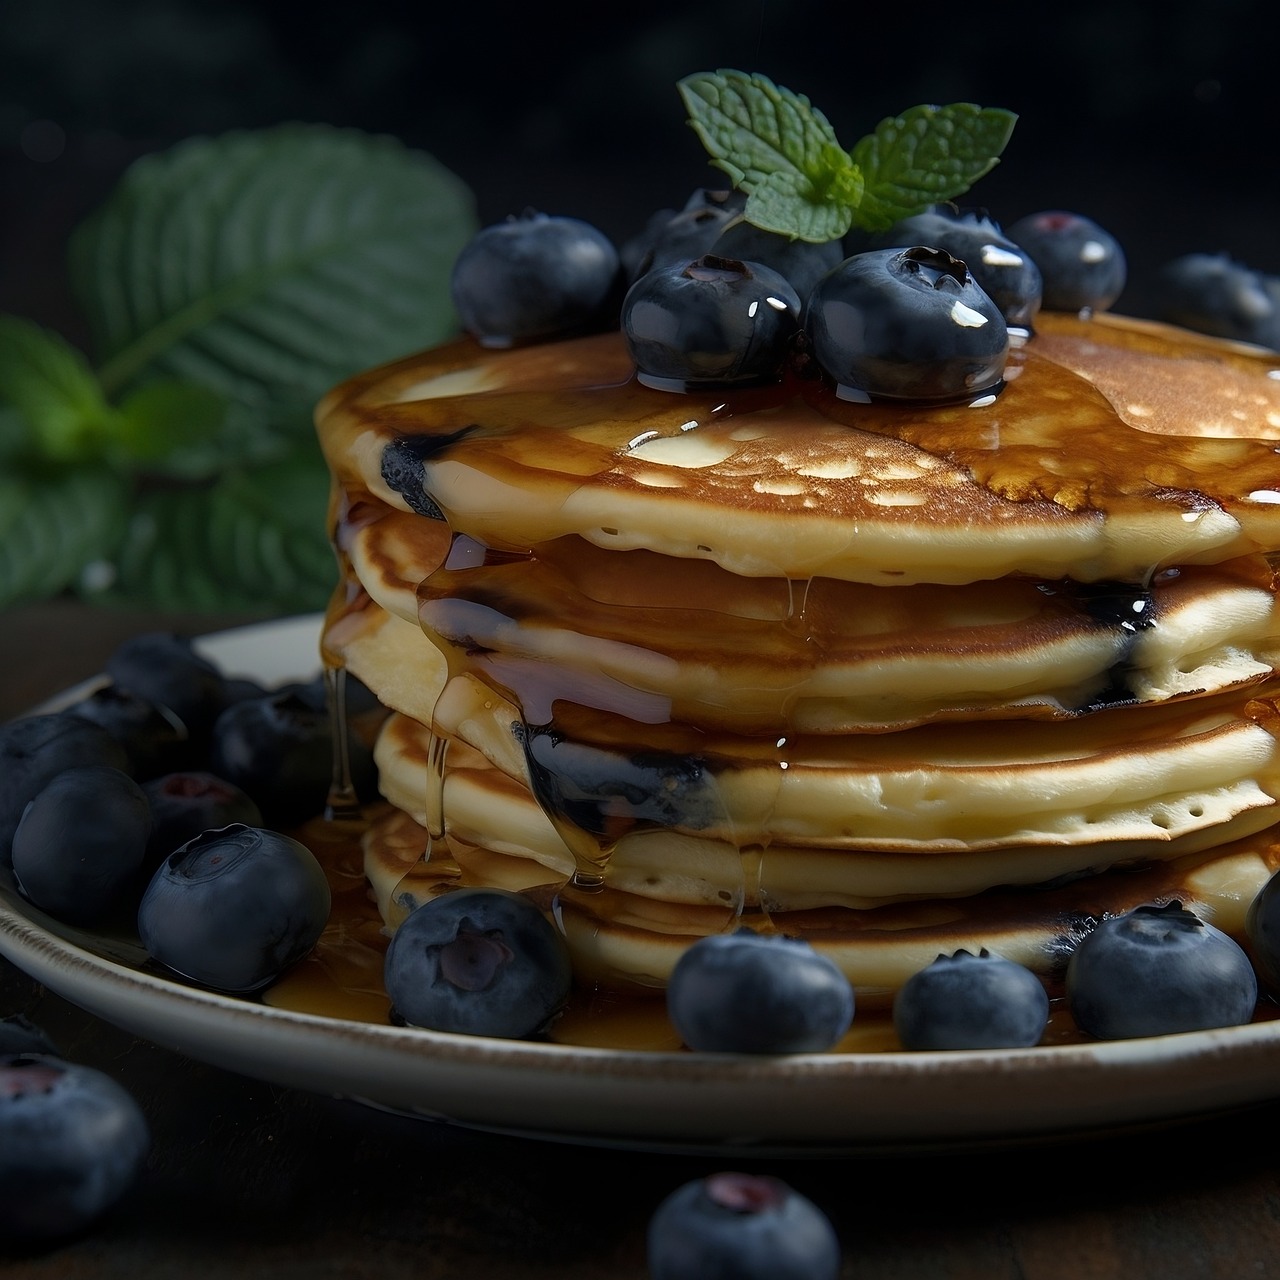 A stack of American-style pancakes are on a plate. Sprinkled over them are blueberries. Drizzled on the top and down the sides of the pancakes in syrup.